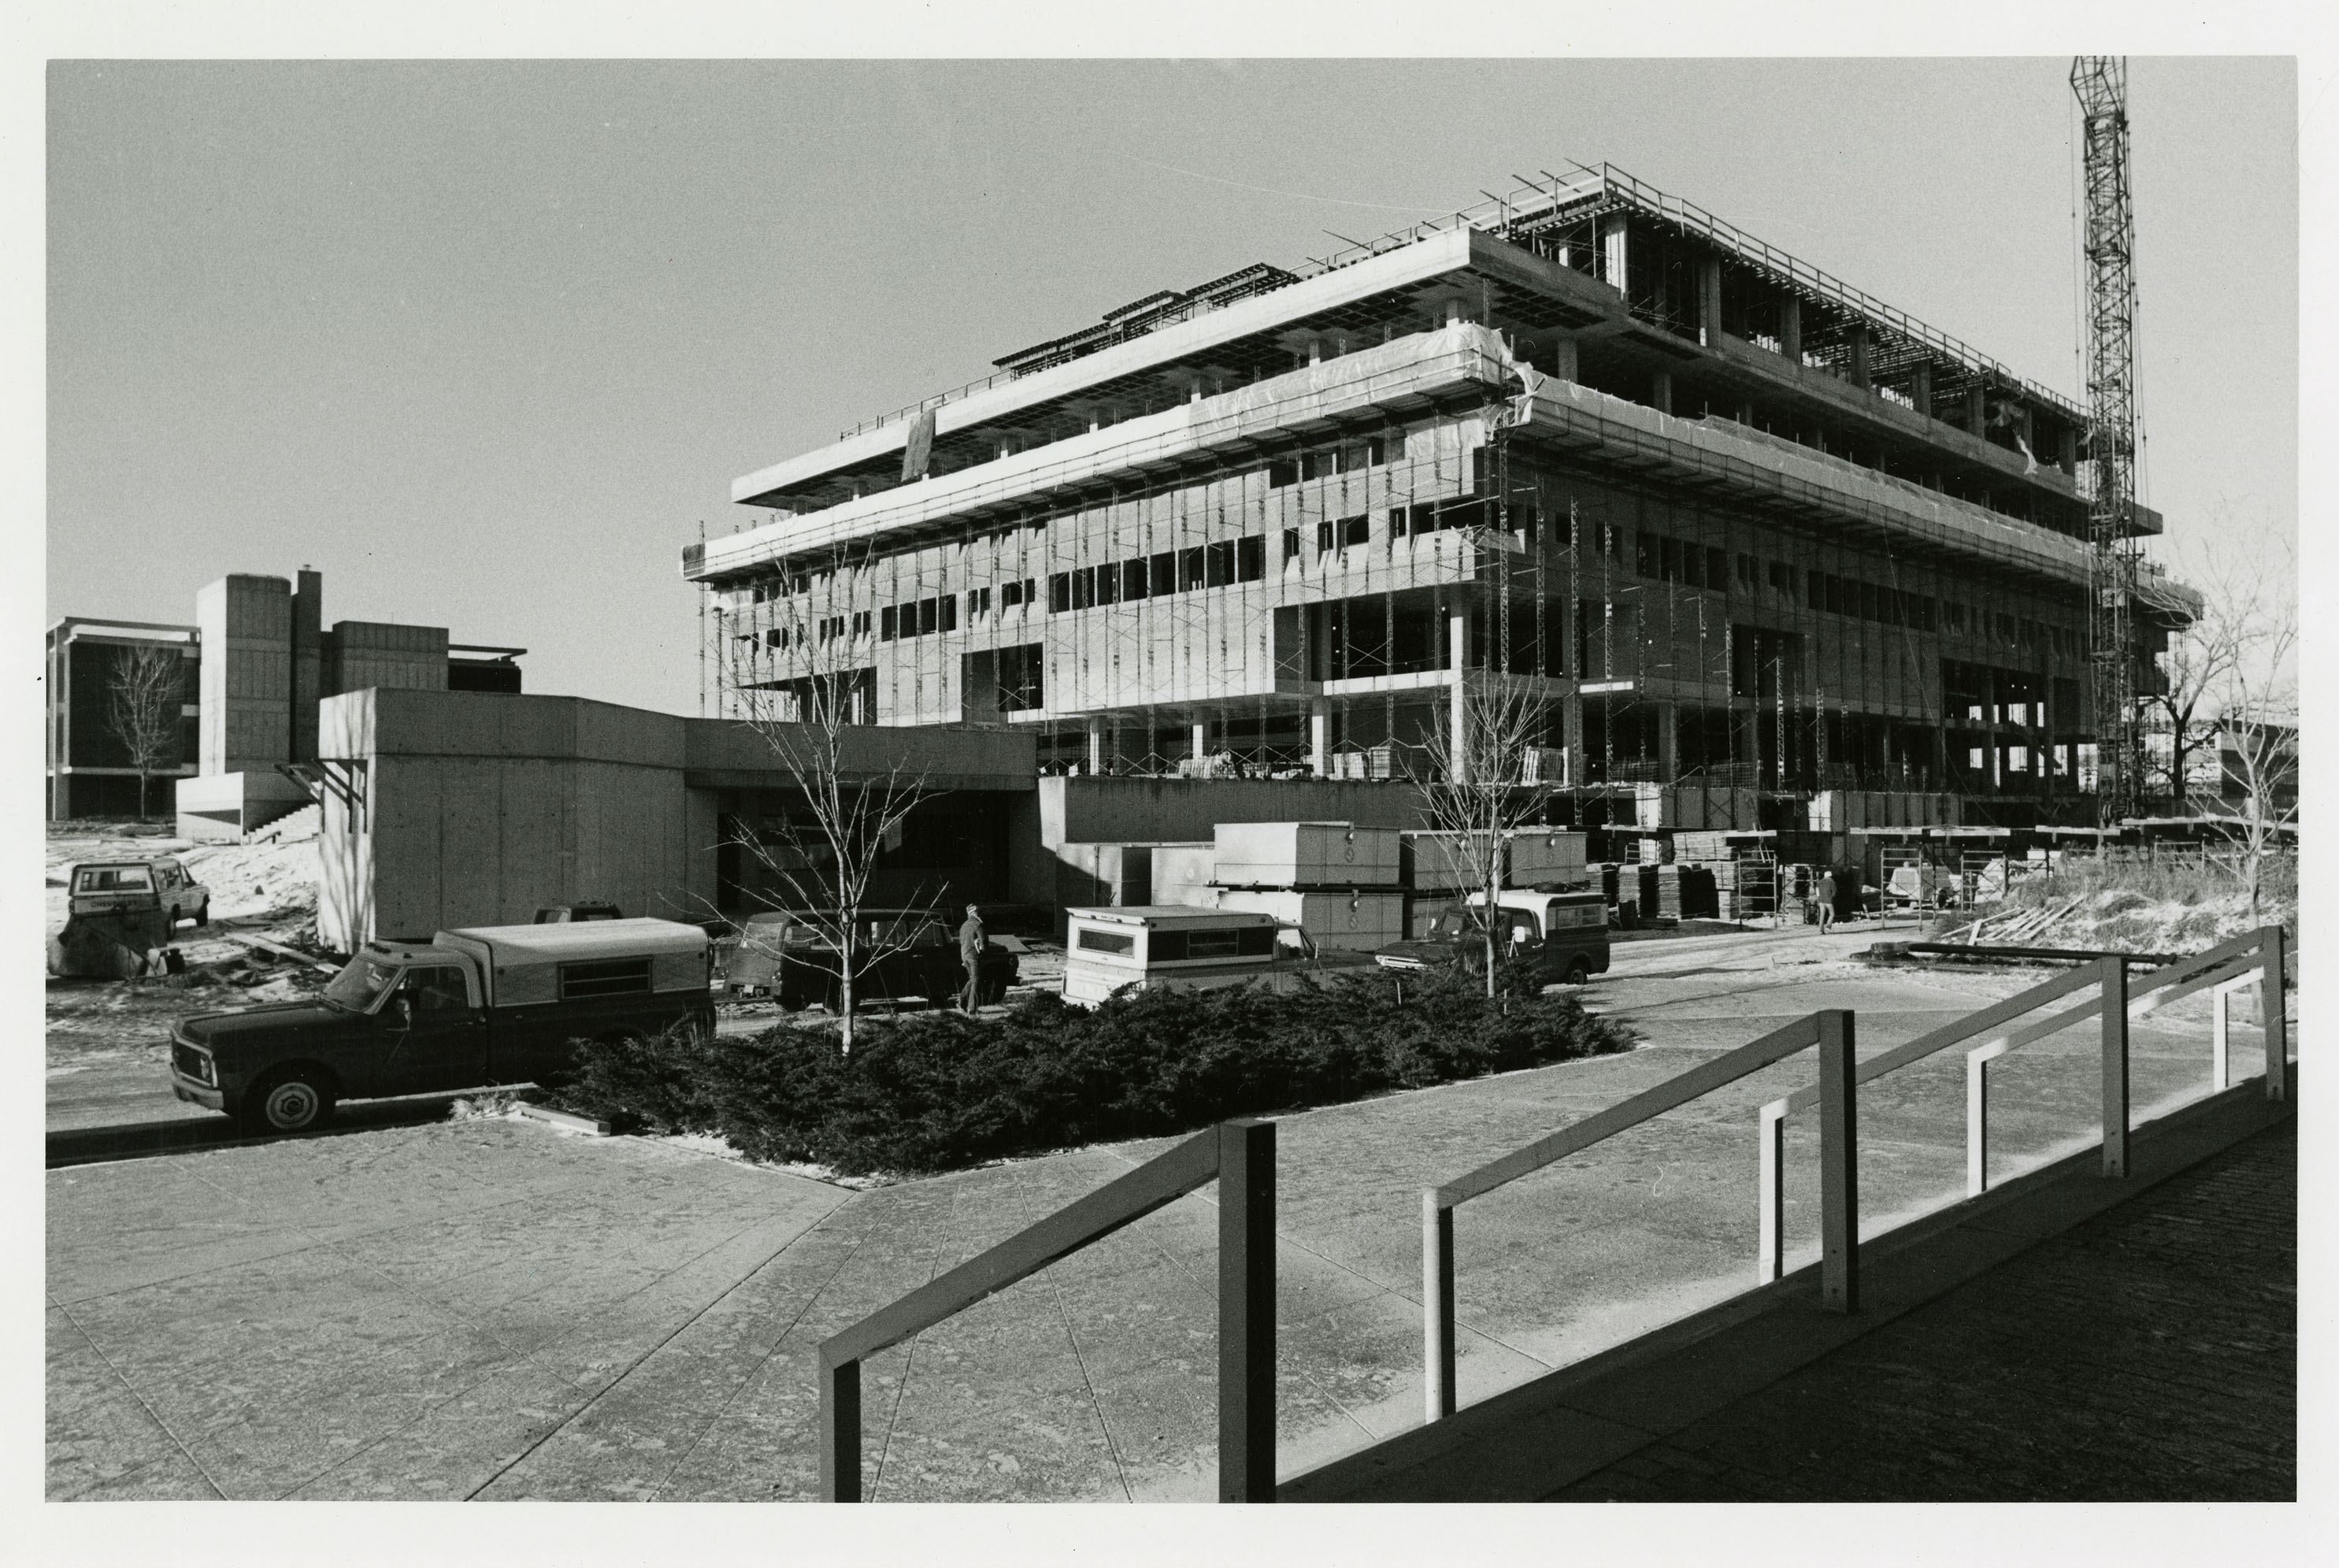 University of Connecticut Library under construction, December 3, 1976